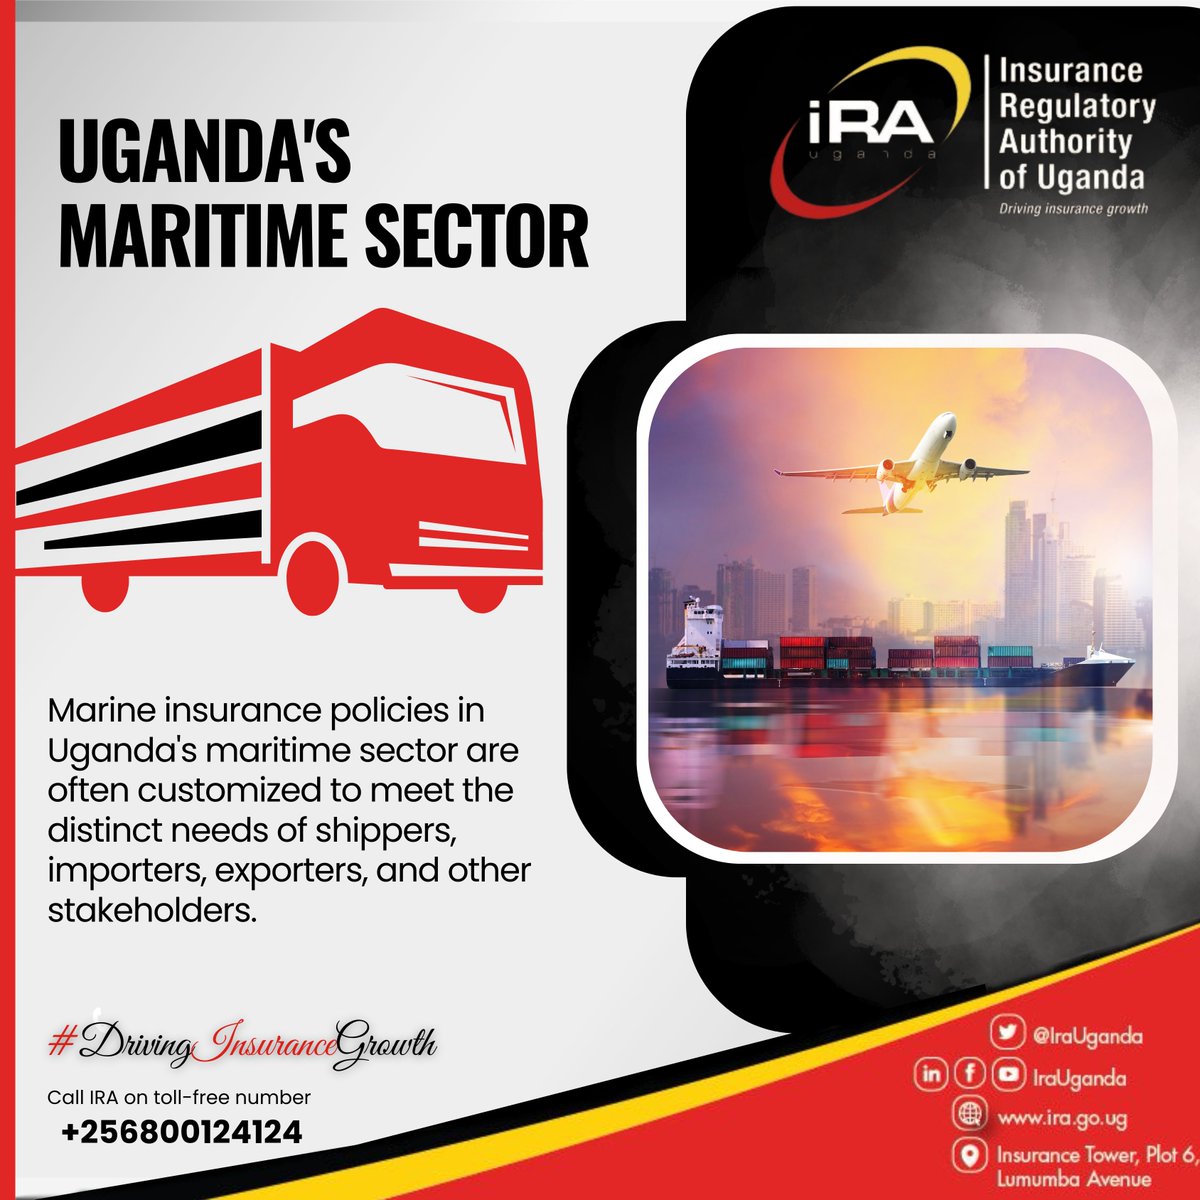 Customized marine insurance in Uganda's maritime sector adapts to the unique requirements of shippers, importers, exporters, and stakeholders, ensuring comprehensive coverage.
 #MarineInsurance #CustomizedPolicies #UgandaMaritime #Shippers #Exporters #Importers #InsuranceCoverage